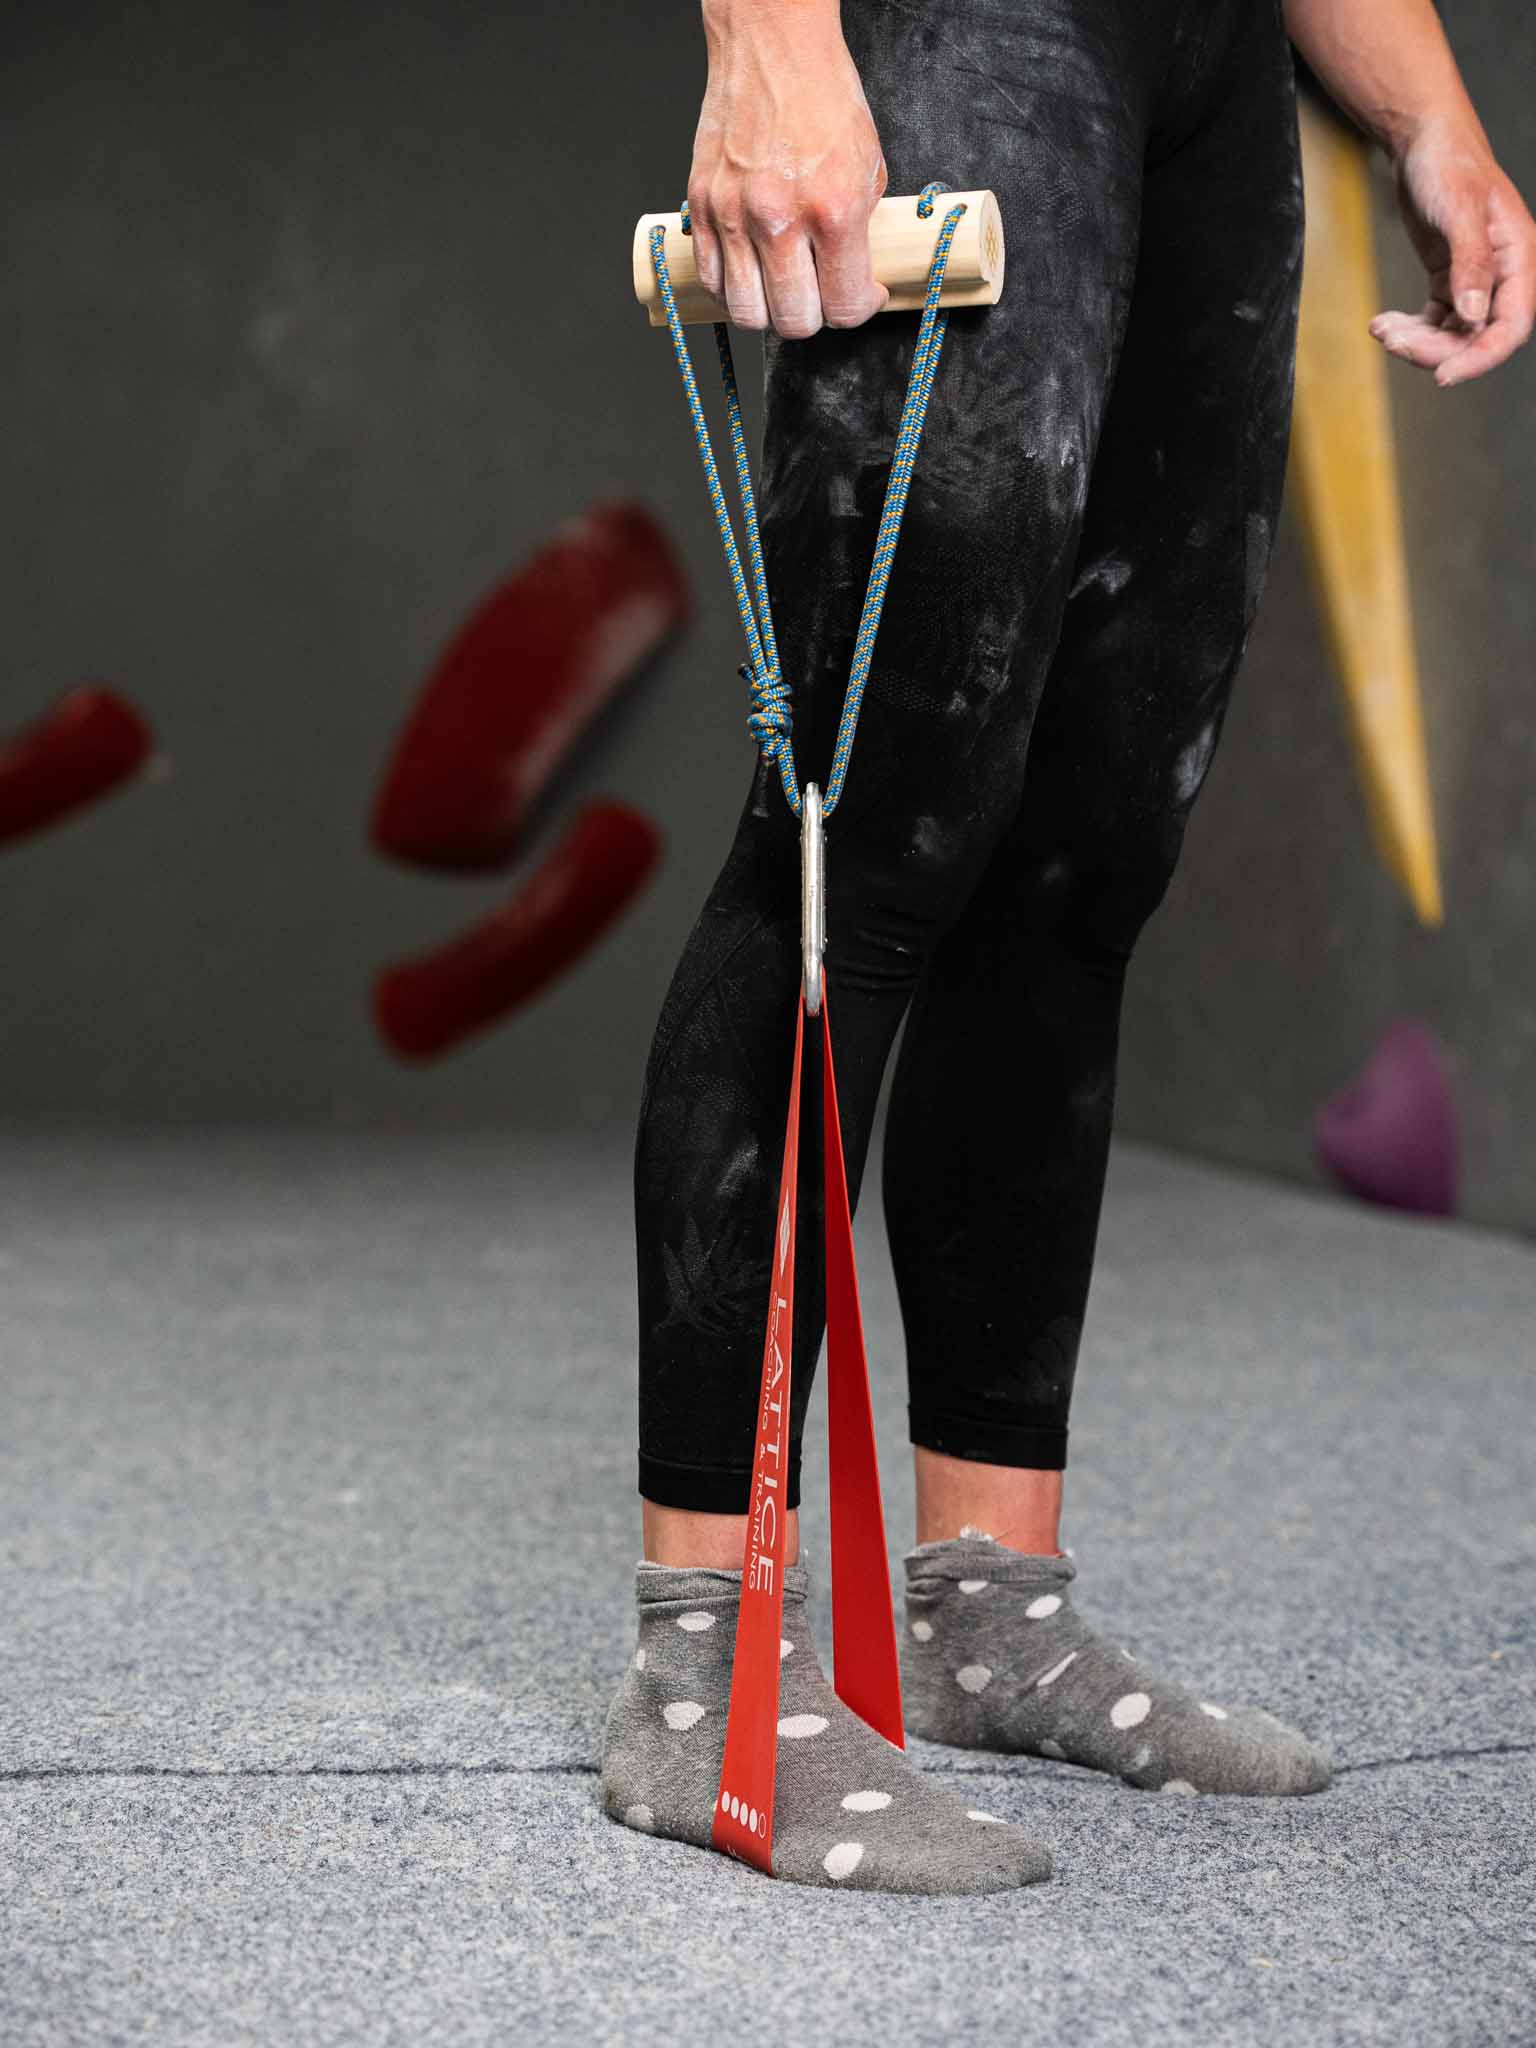 A climber pulls up a mini bar connected to a resistance band